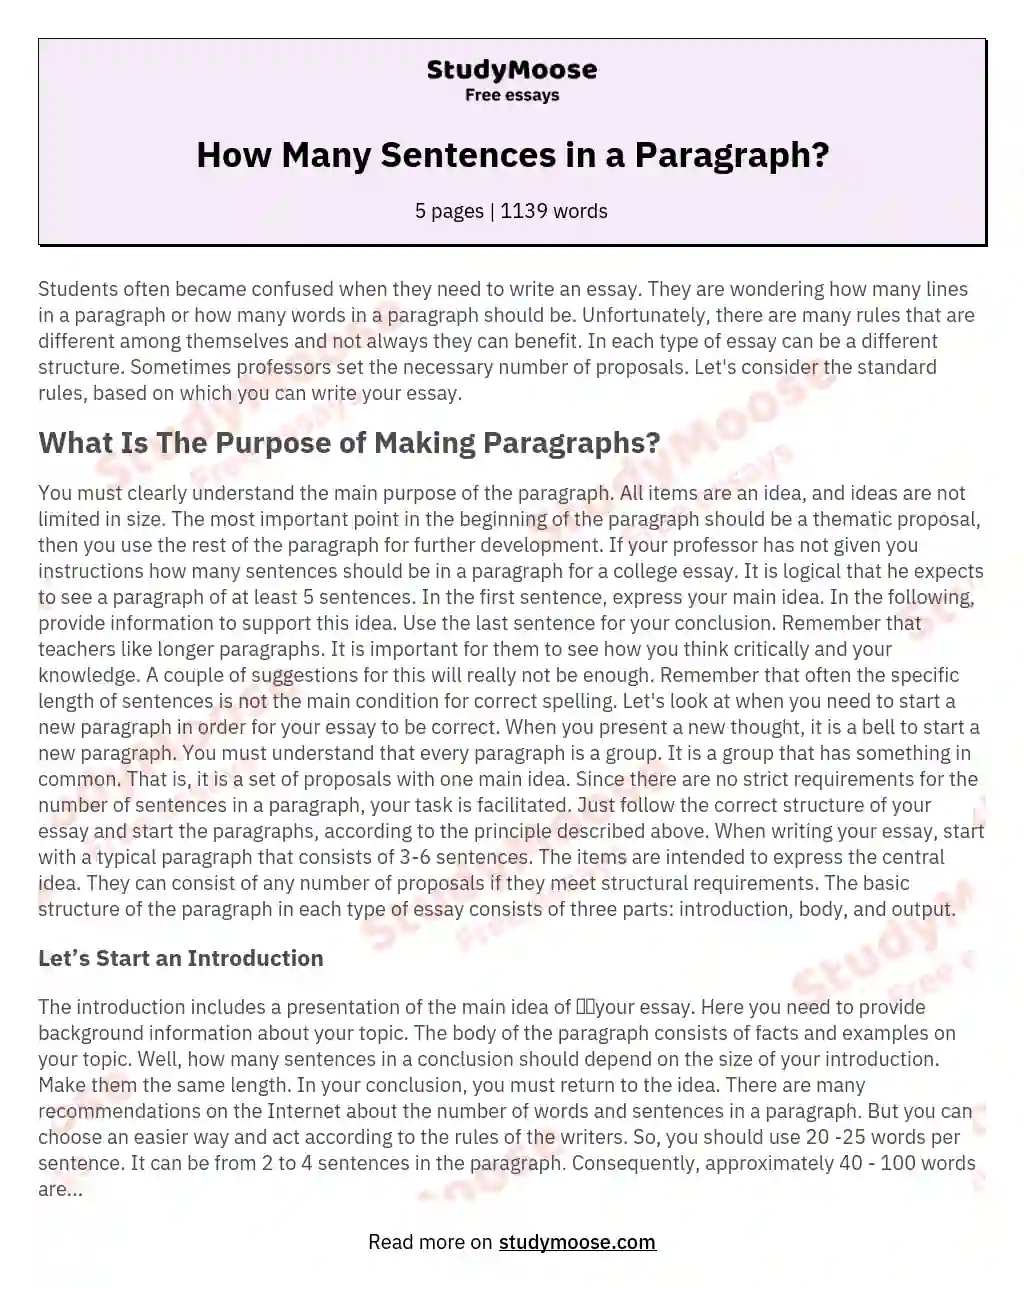 How Many Sentences in a Paragraph? essay